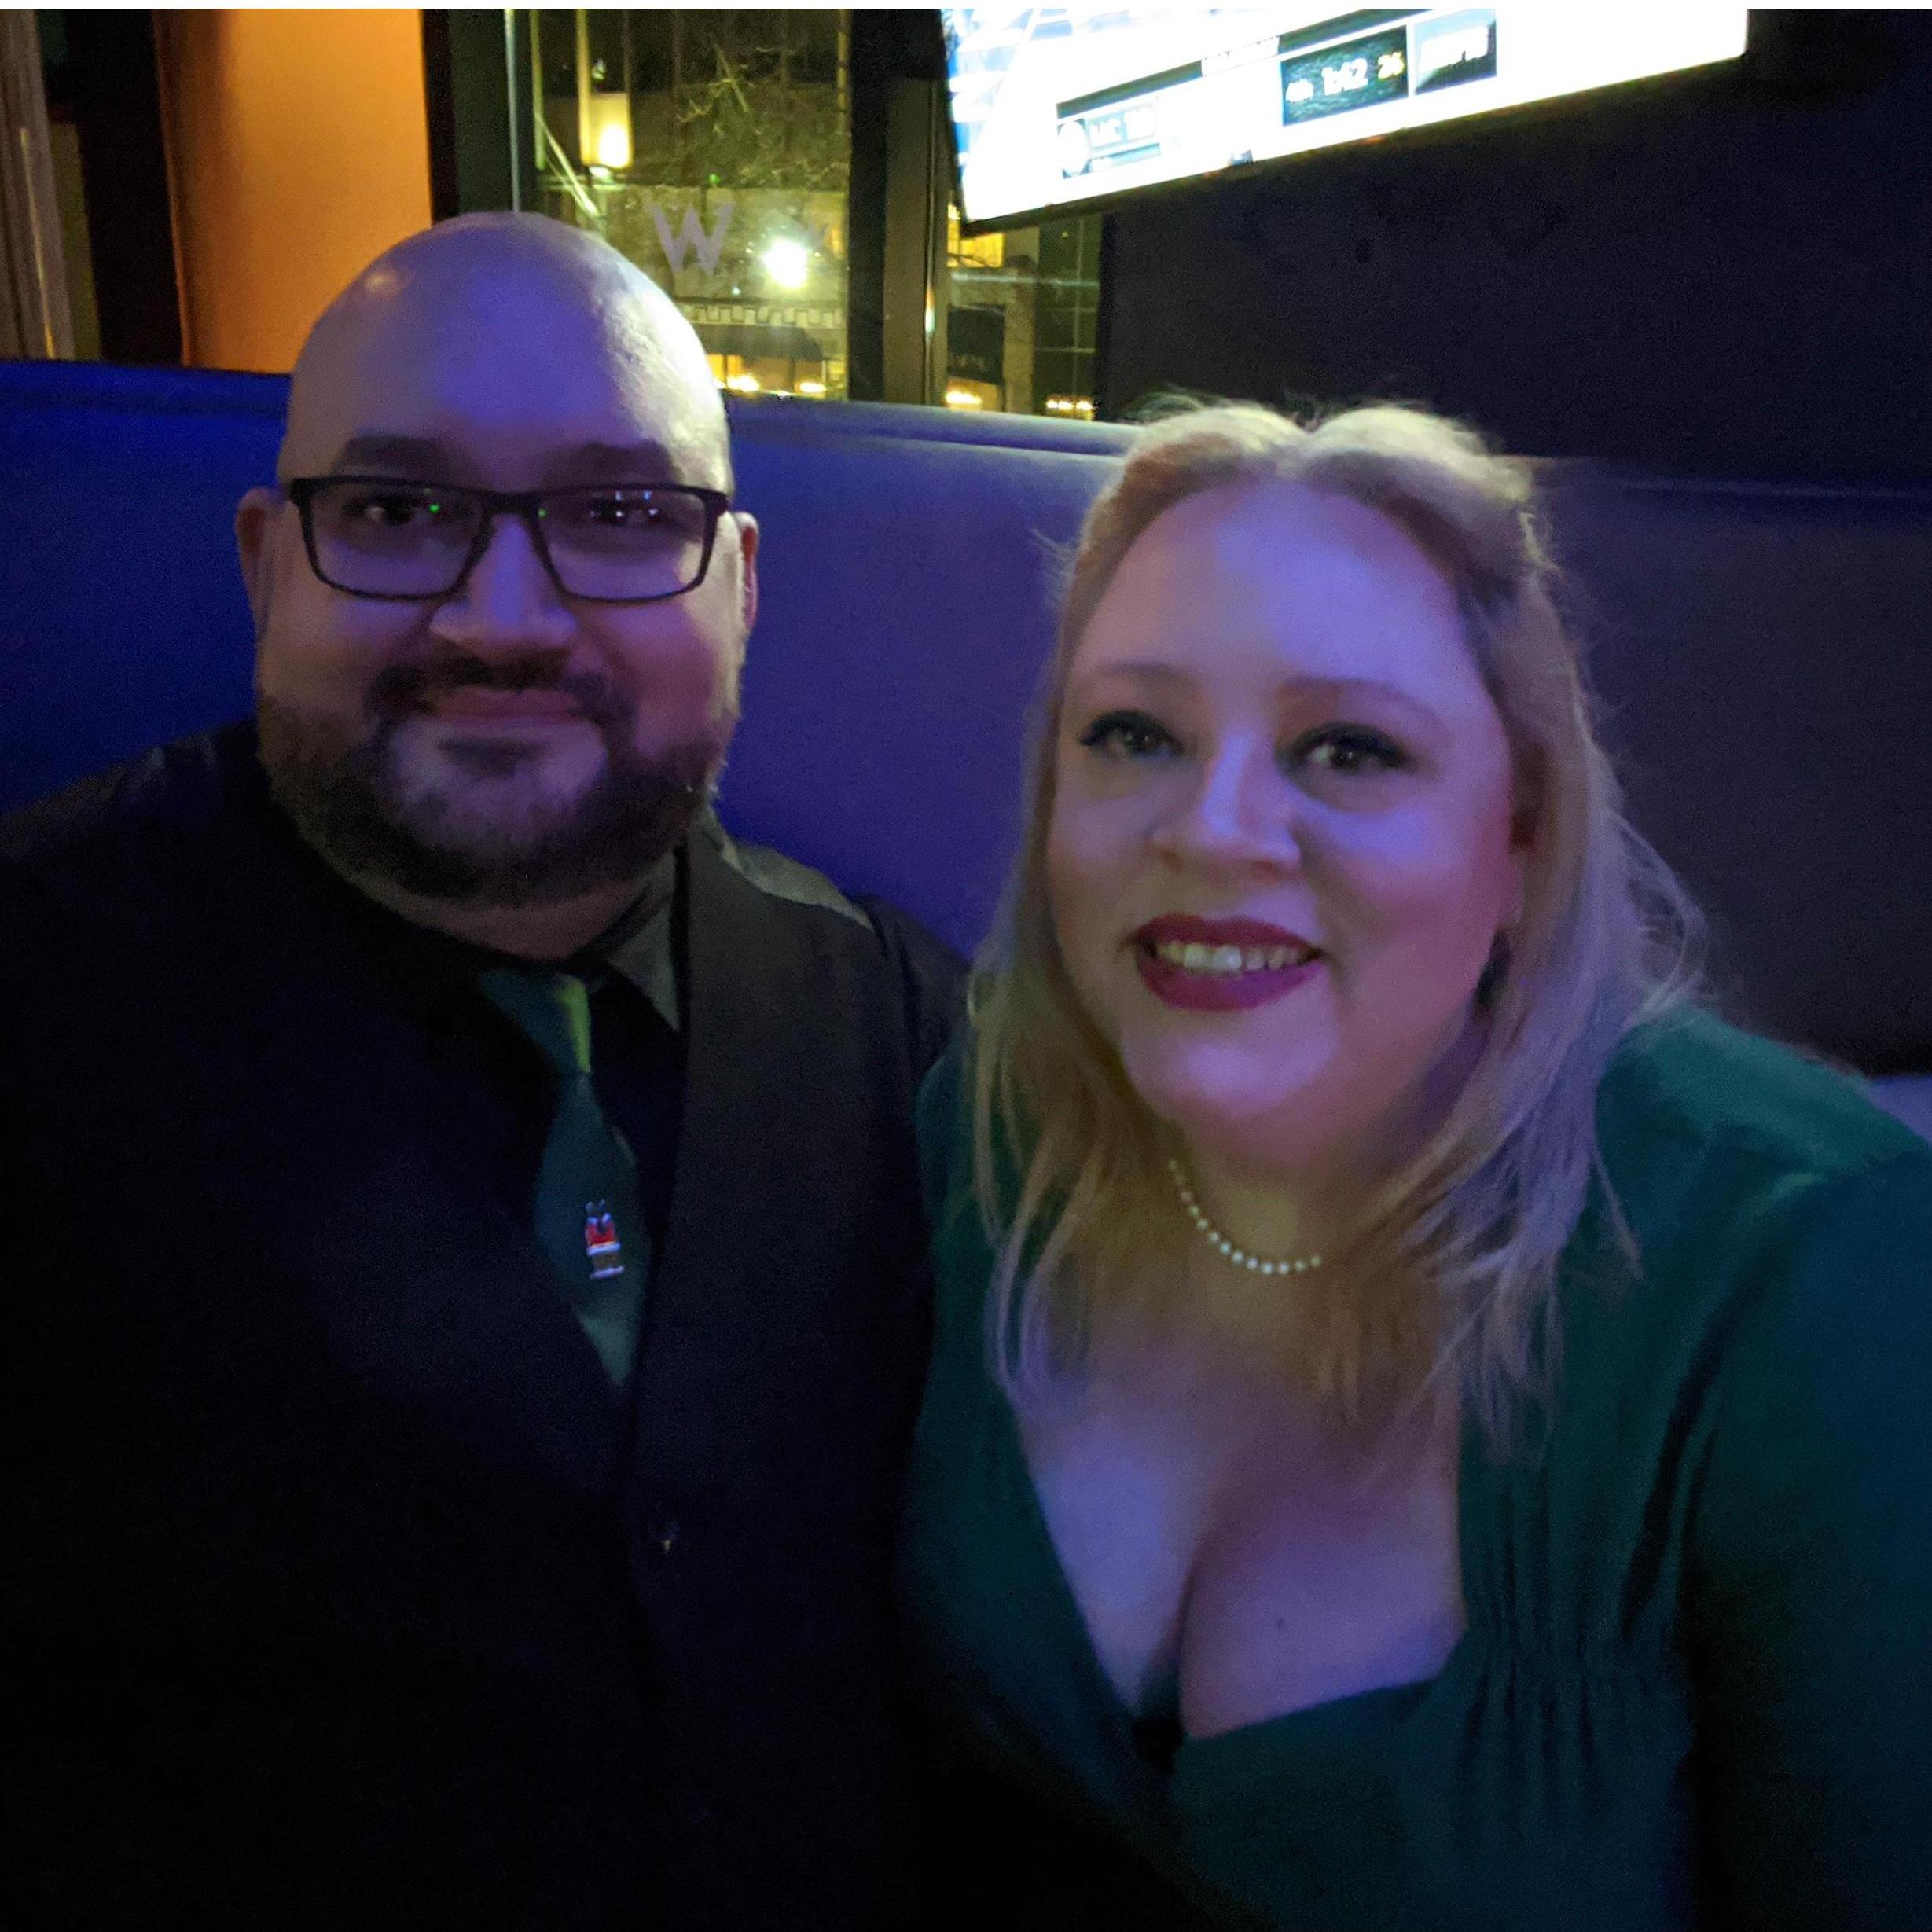 Salesforce Holiday Party at the W, Dec 2019